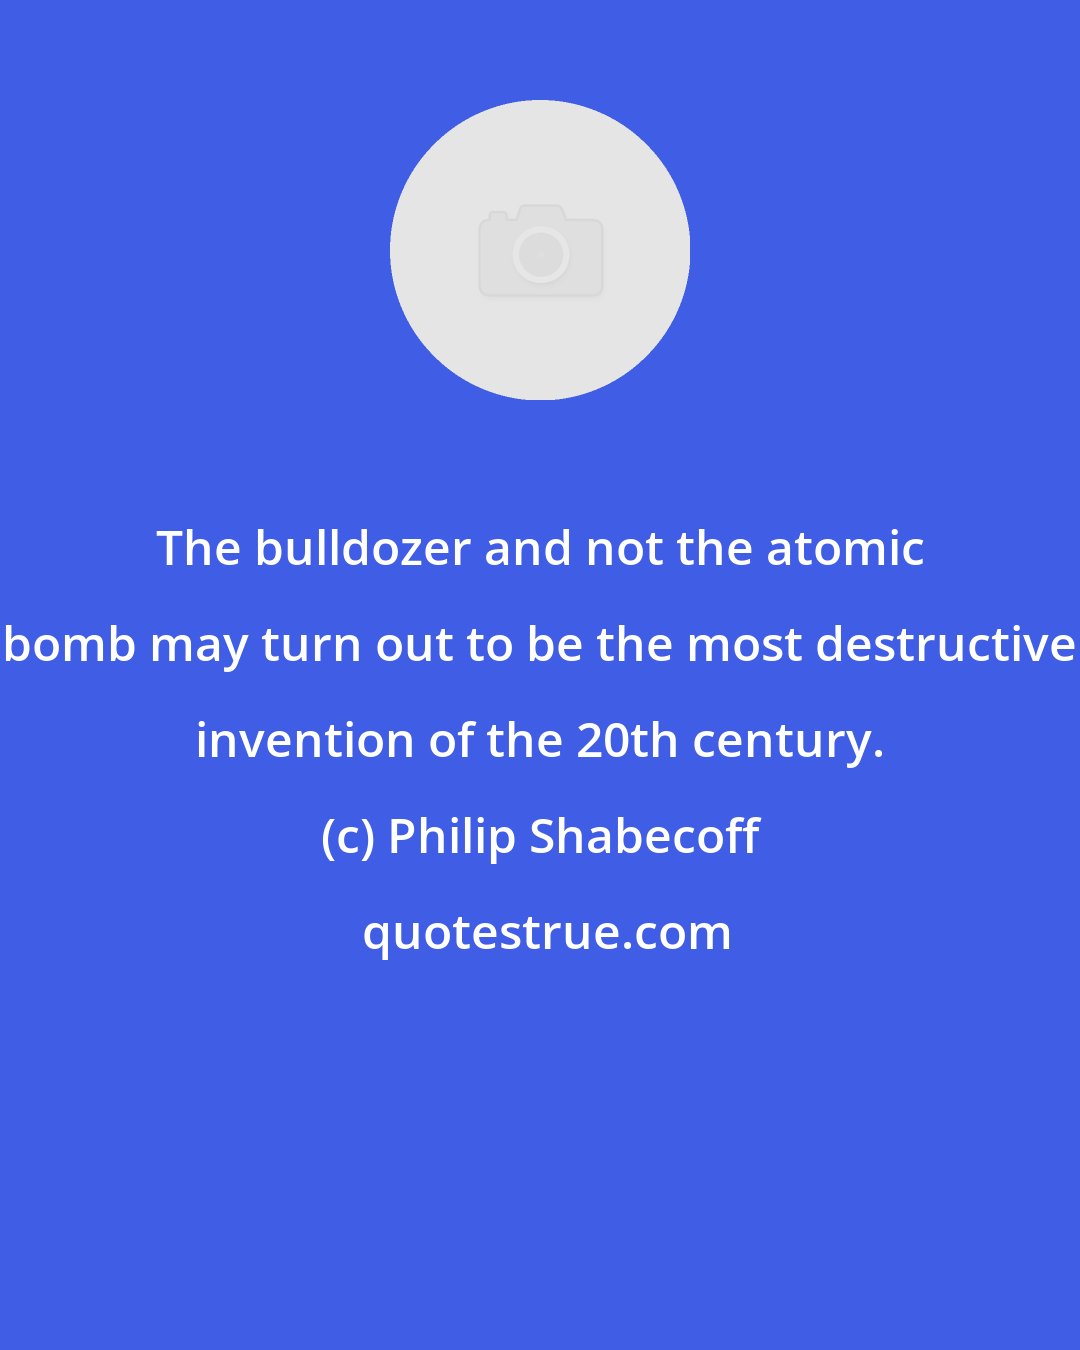 Philip Shabecoff: The bulldozer and not the atomic bomb may turn out to be the most destructive invention of the 20th century.